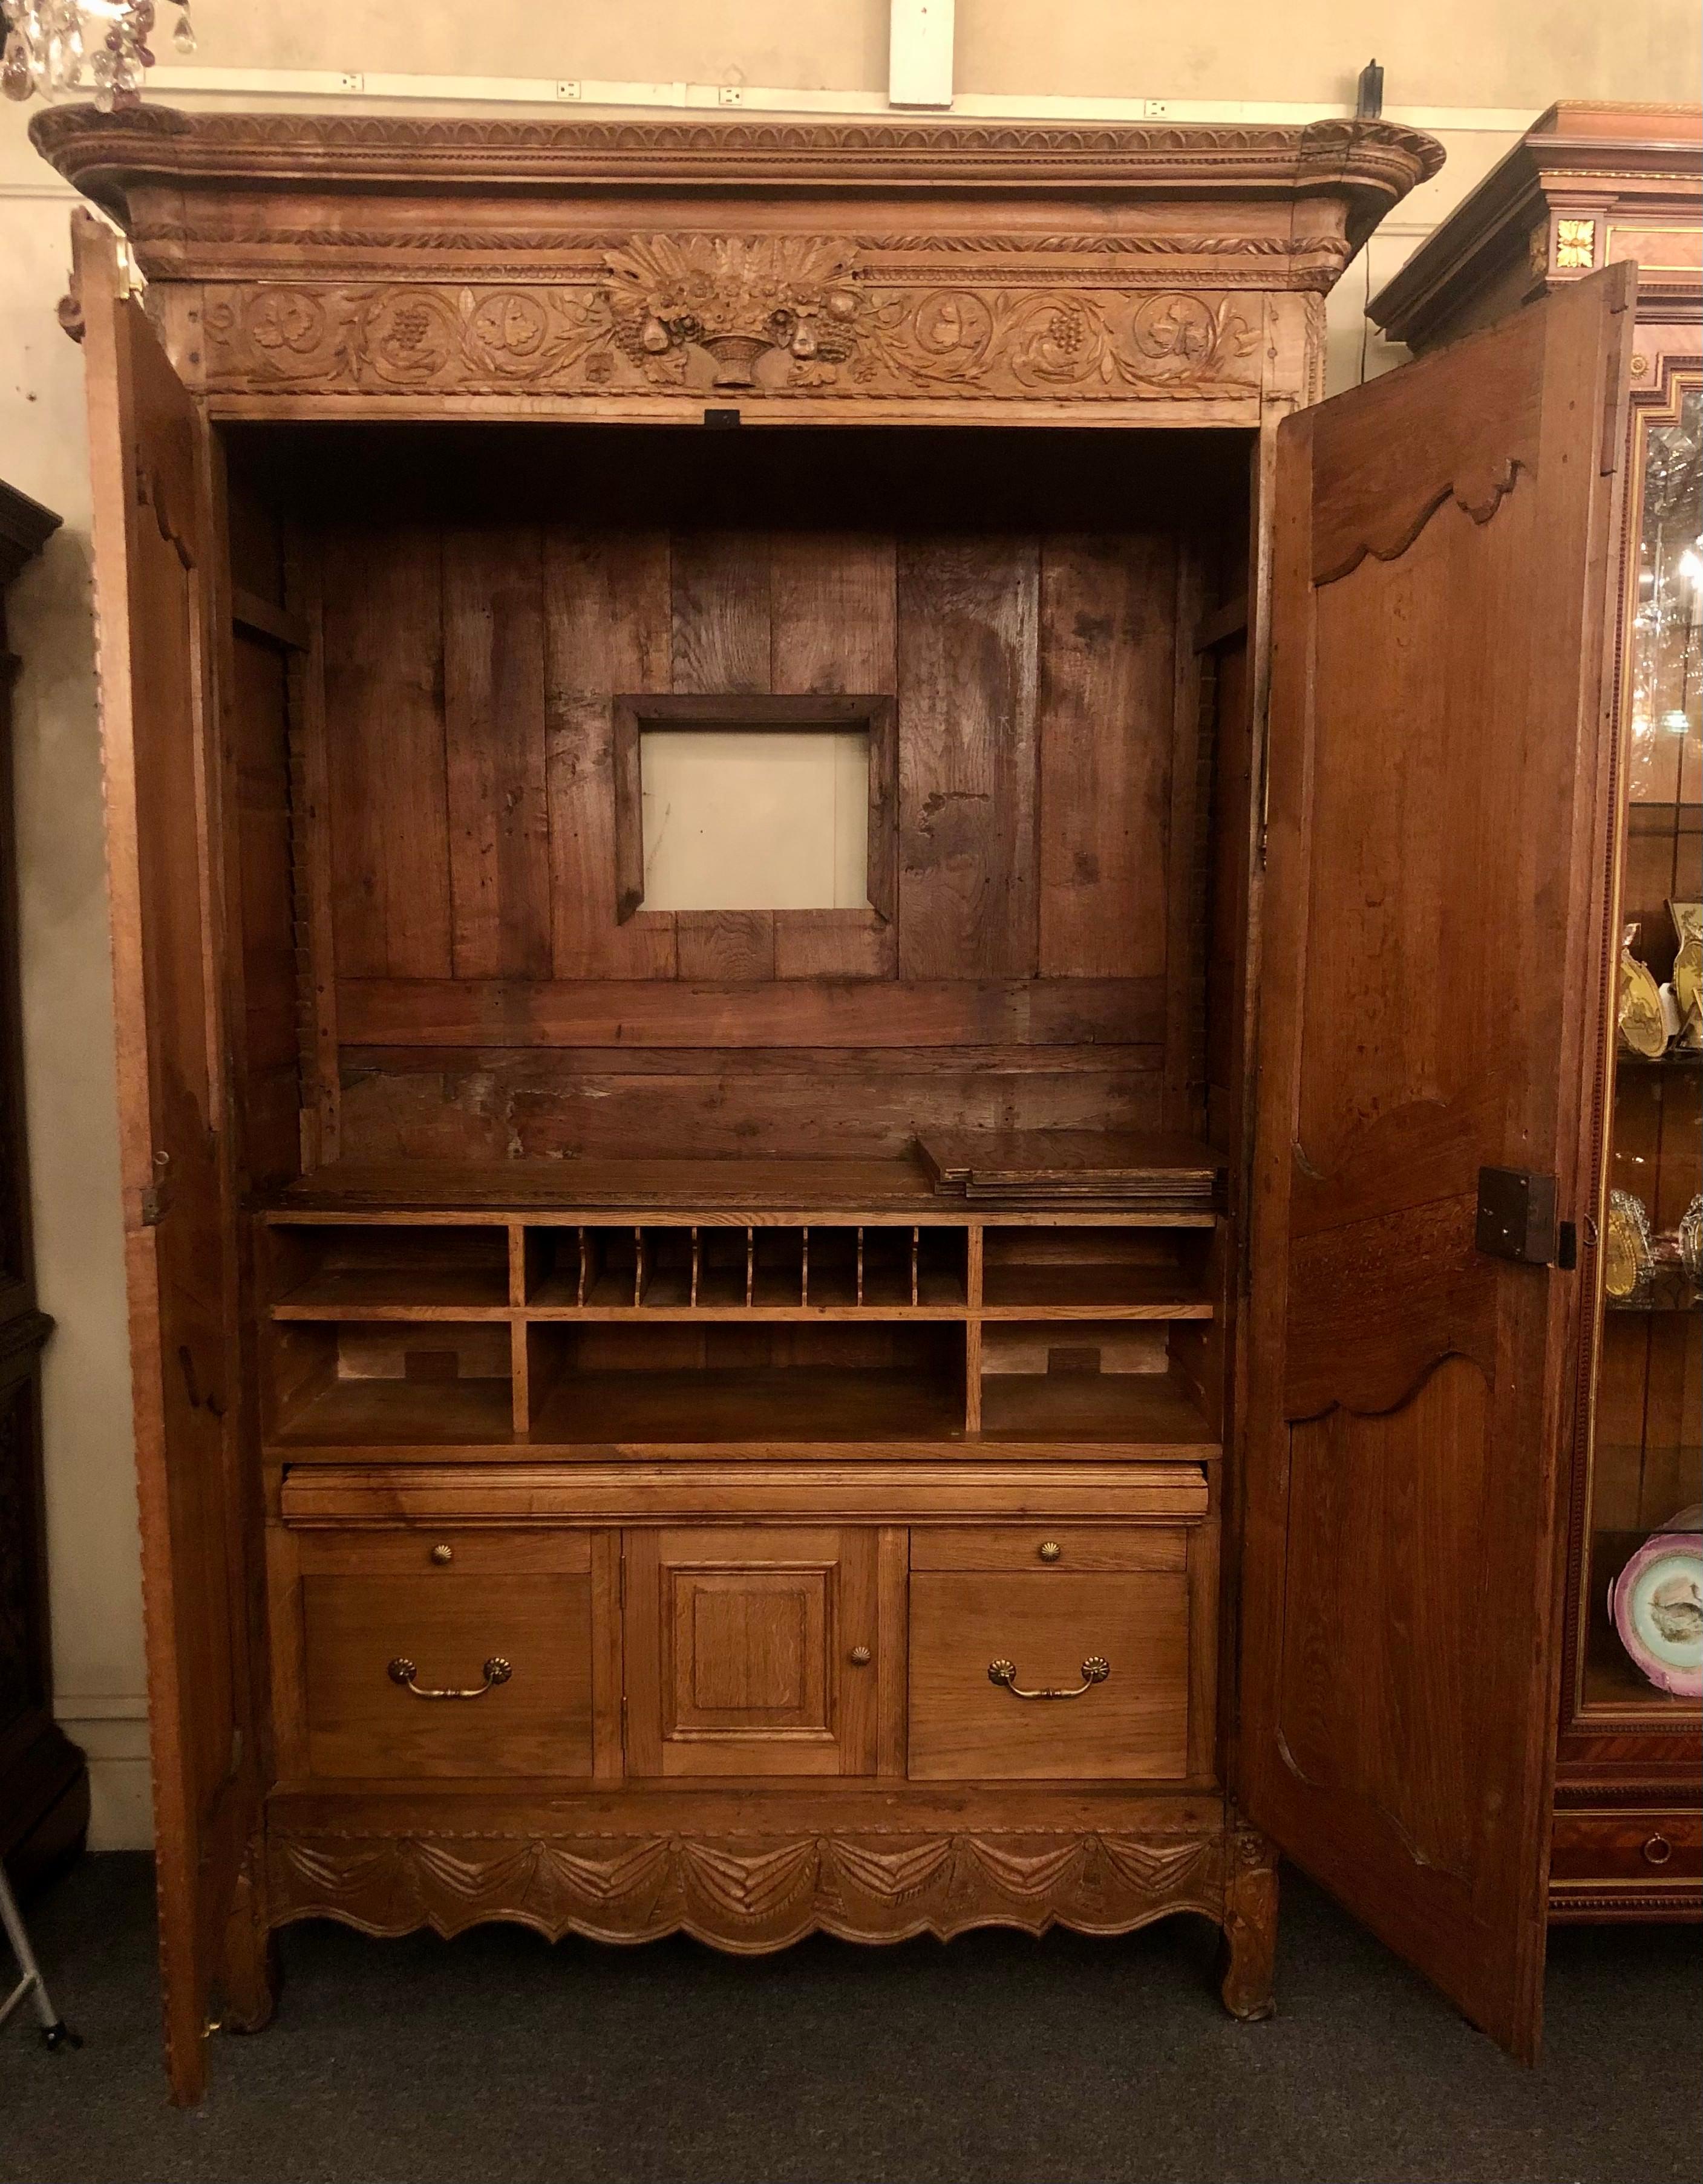 Antique French Provincial carved elm 2 door armoire with original brass hardware and fitted interior, Circa 1890's.